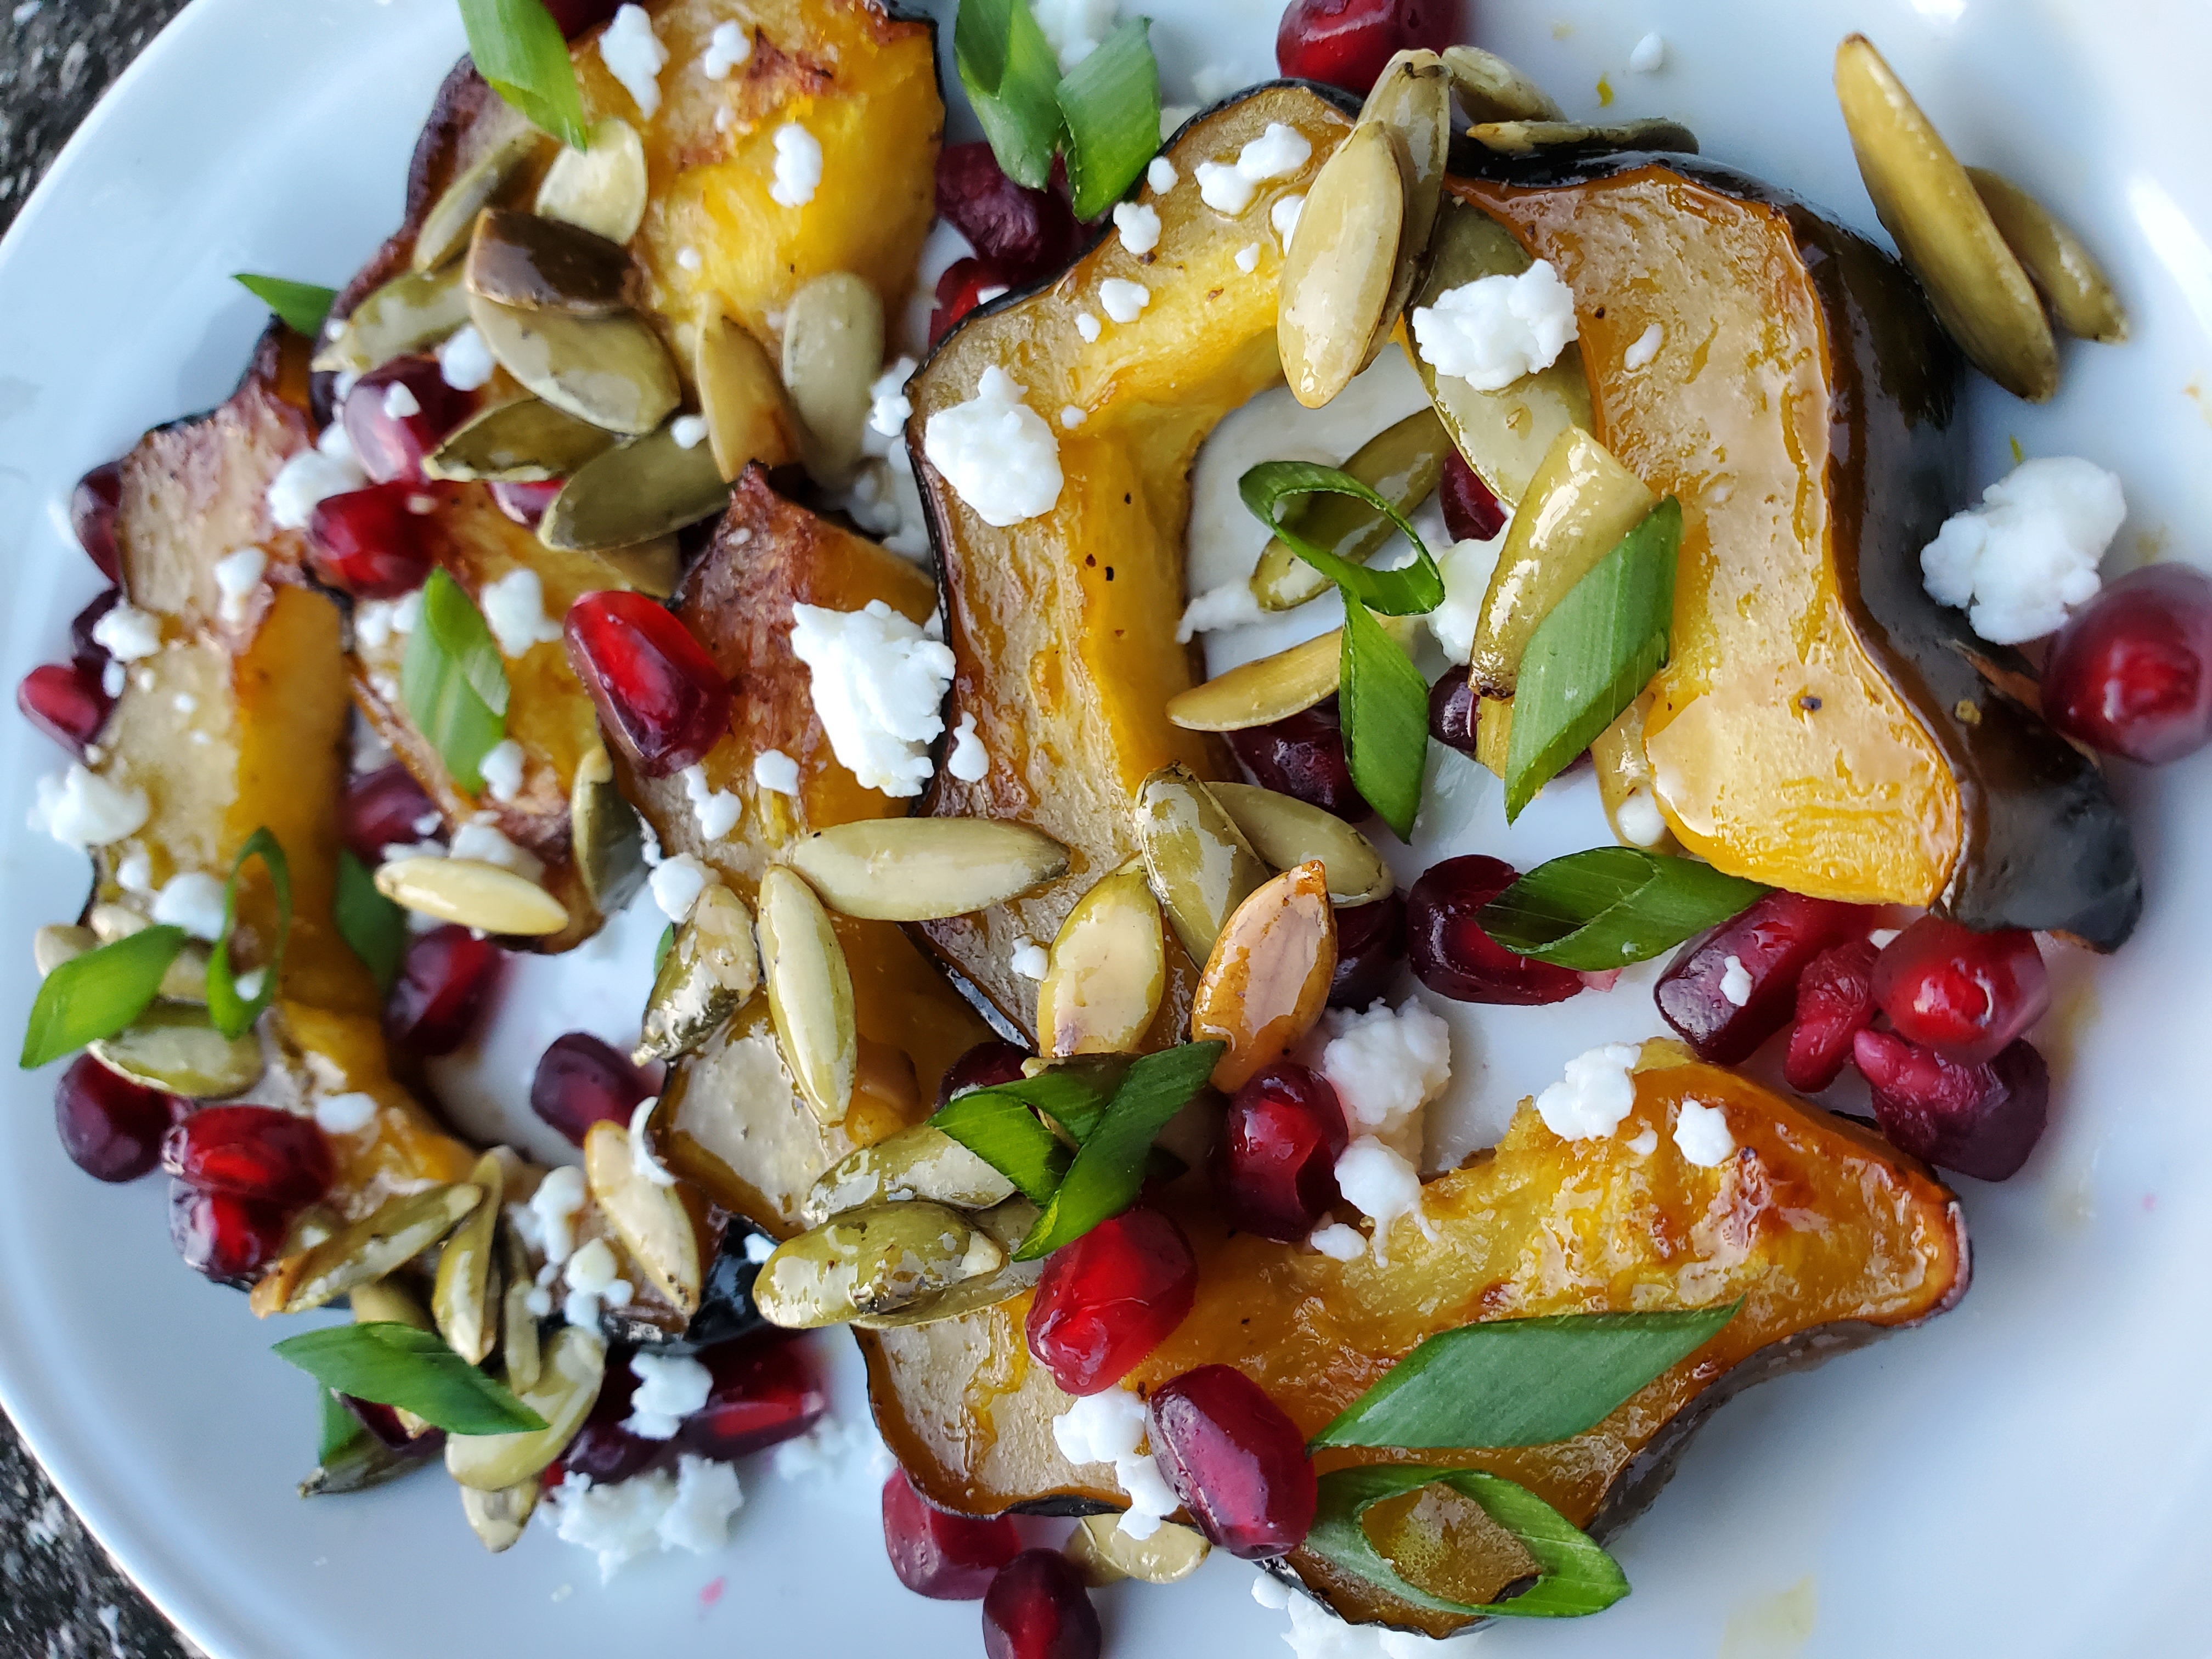 Roasted Acorn Squash with Pomegranate Arils, Feta Cheese, and Pumpkin Seeds